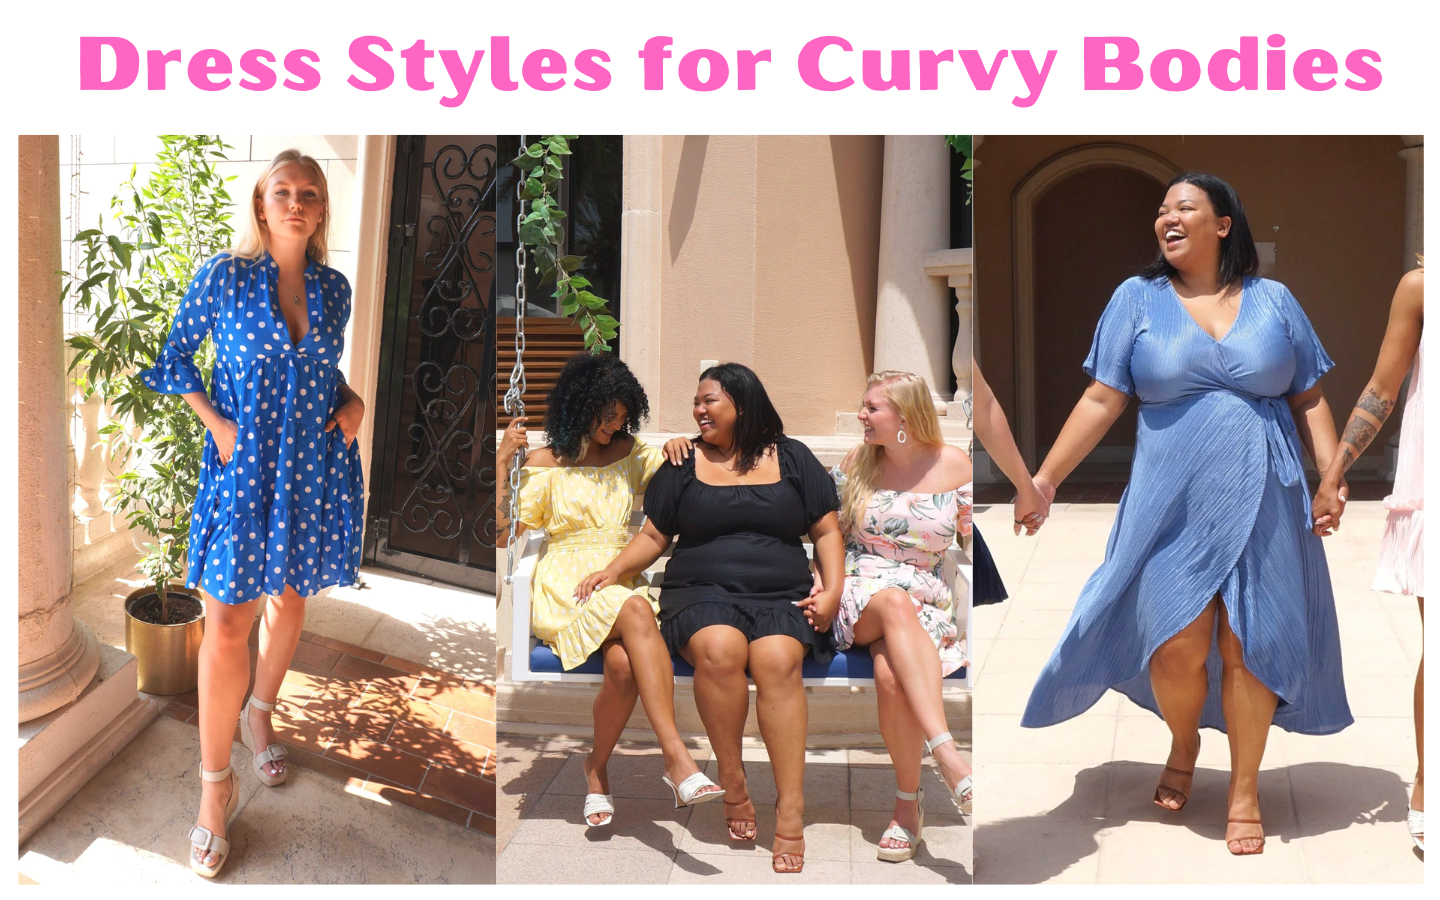 How to Choose Flattering Dress Styles for Curvy Bodies: A Complete